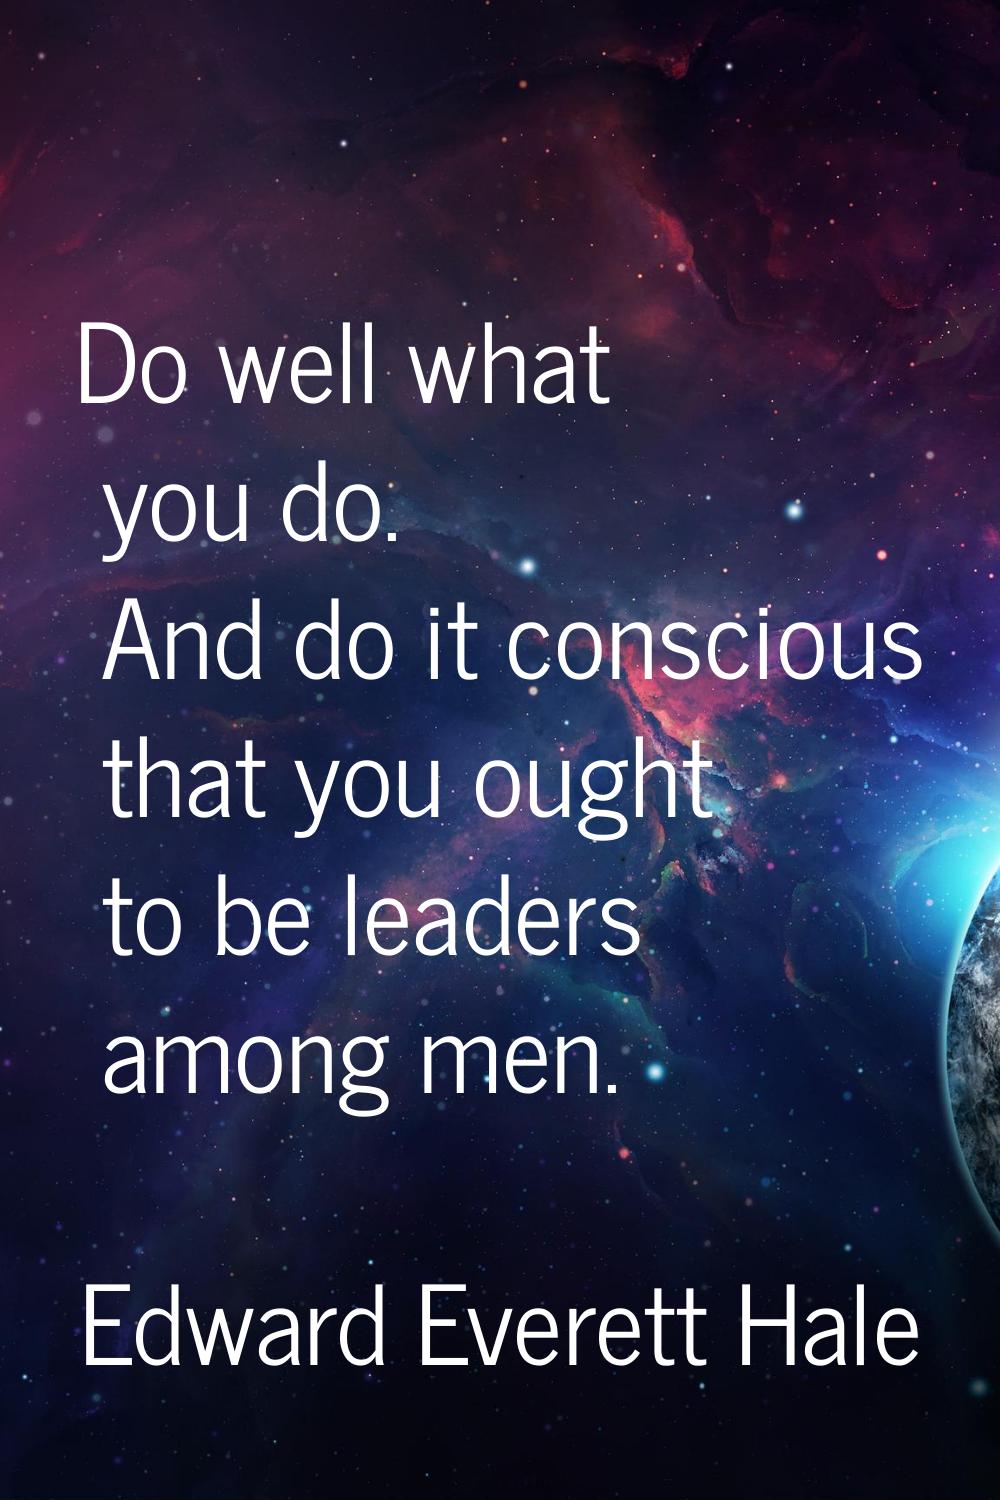 Do well what you do. And do it conscious that you ought to be leaders among men.